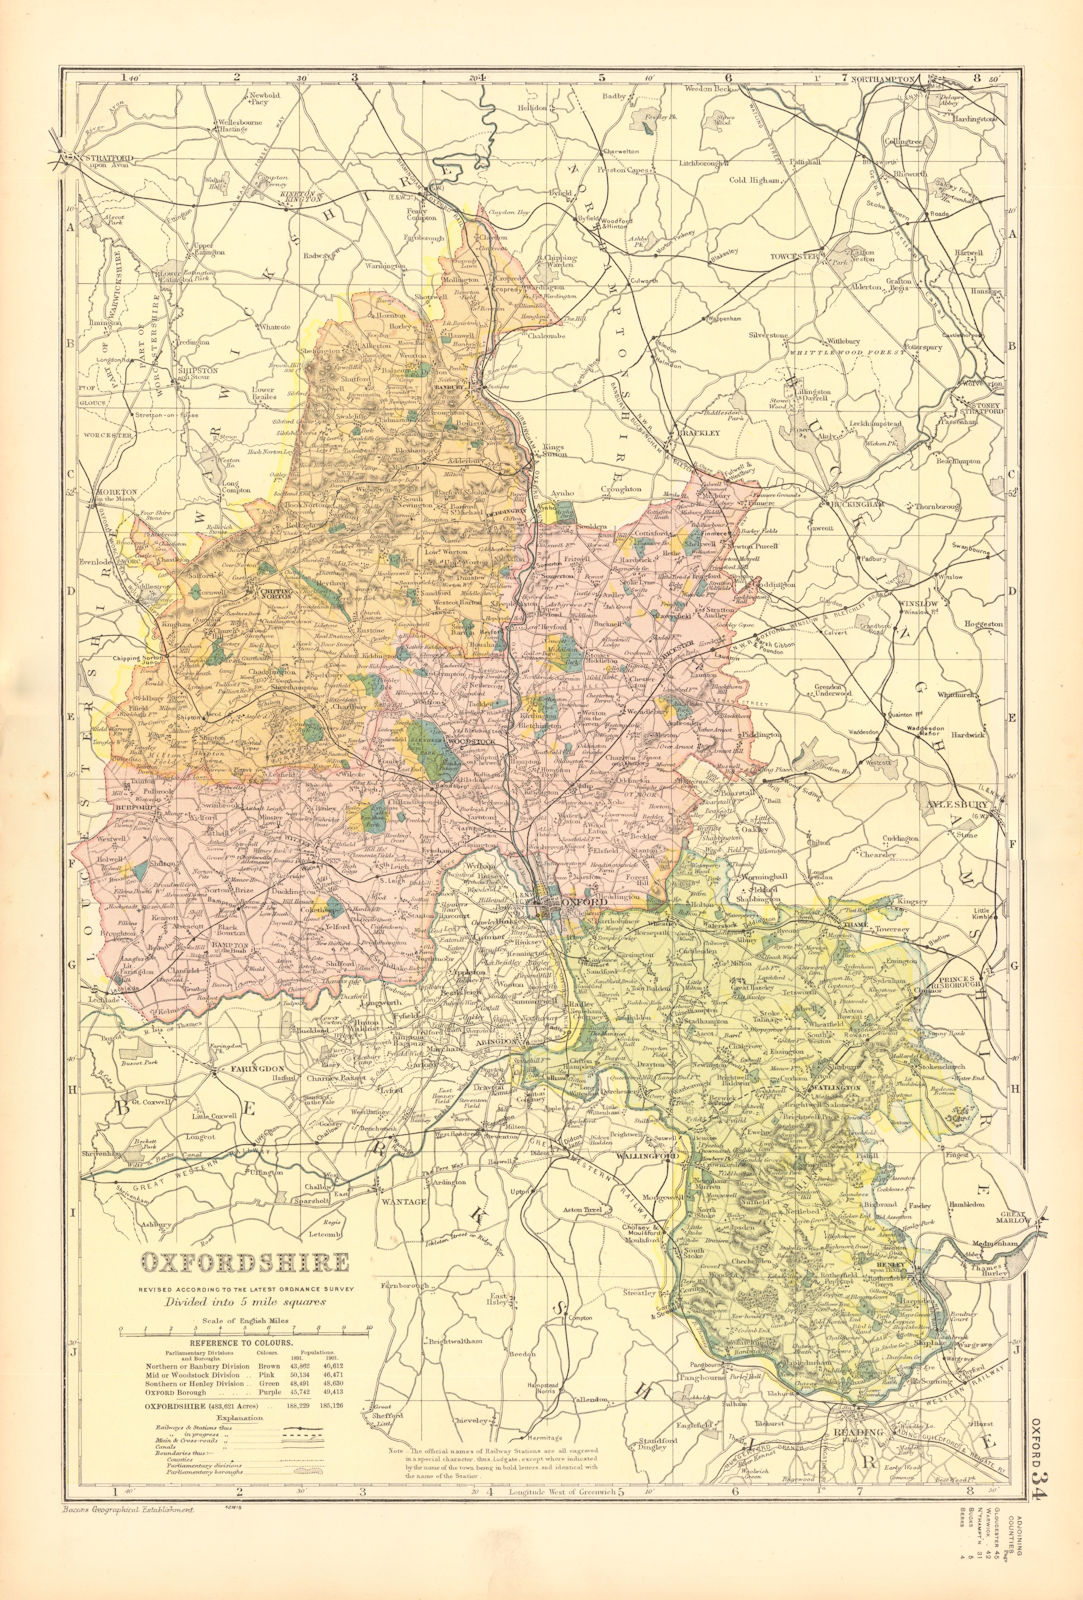 Associate Product OXFORDSHIRE. Showing Parliamentary divisions, boroughs & parks. BACON 1904 map